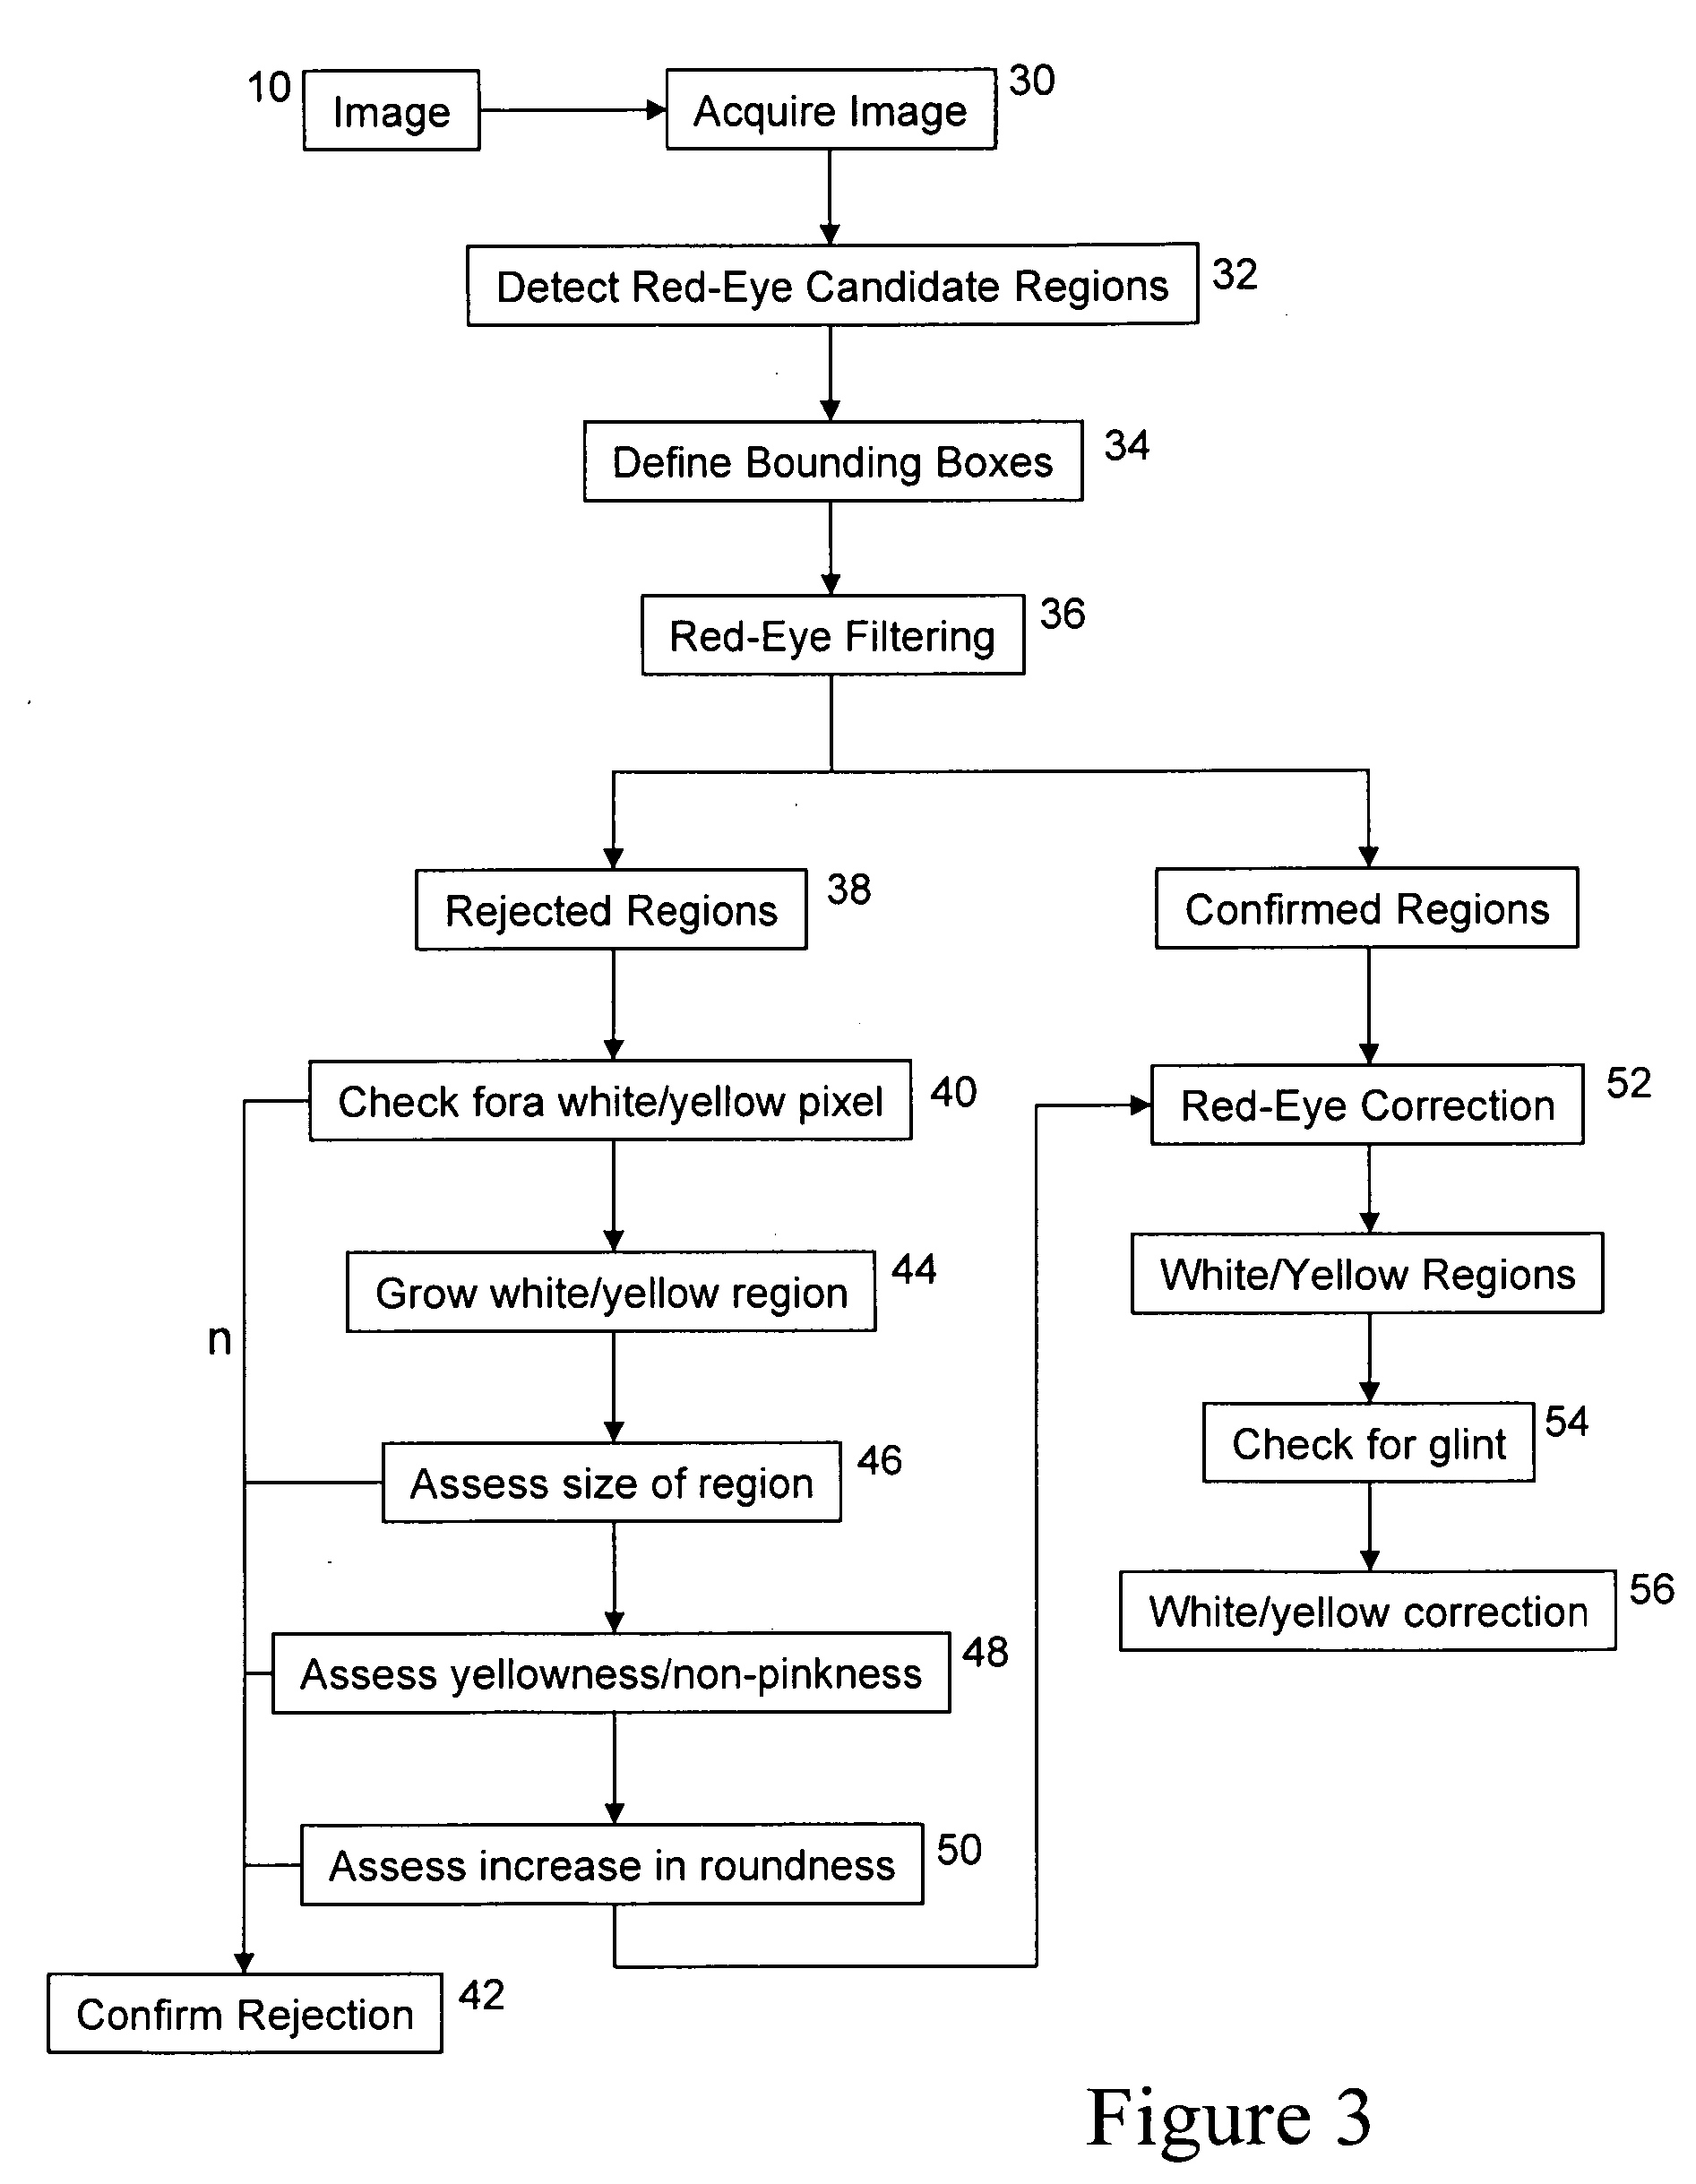 Method and apparatus of correcting hybrid flash artifacts in digital images